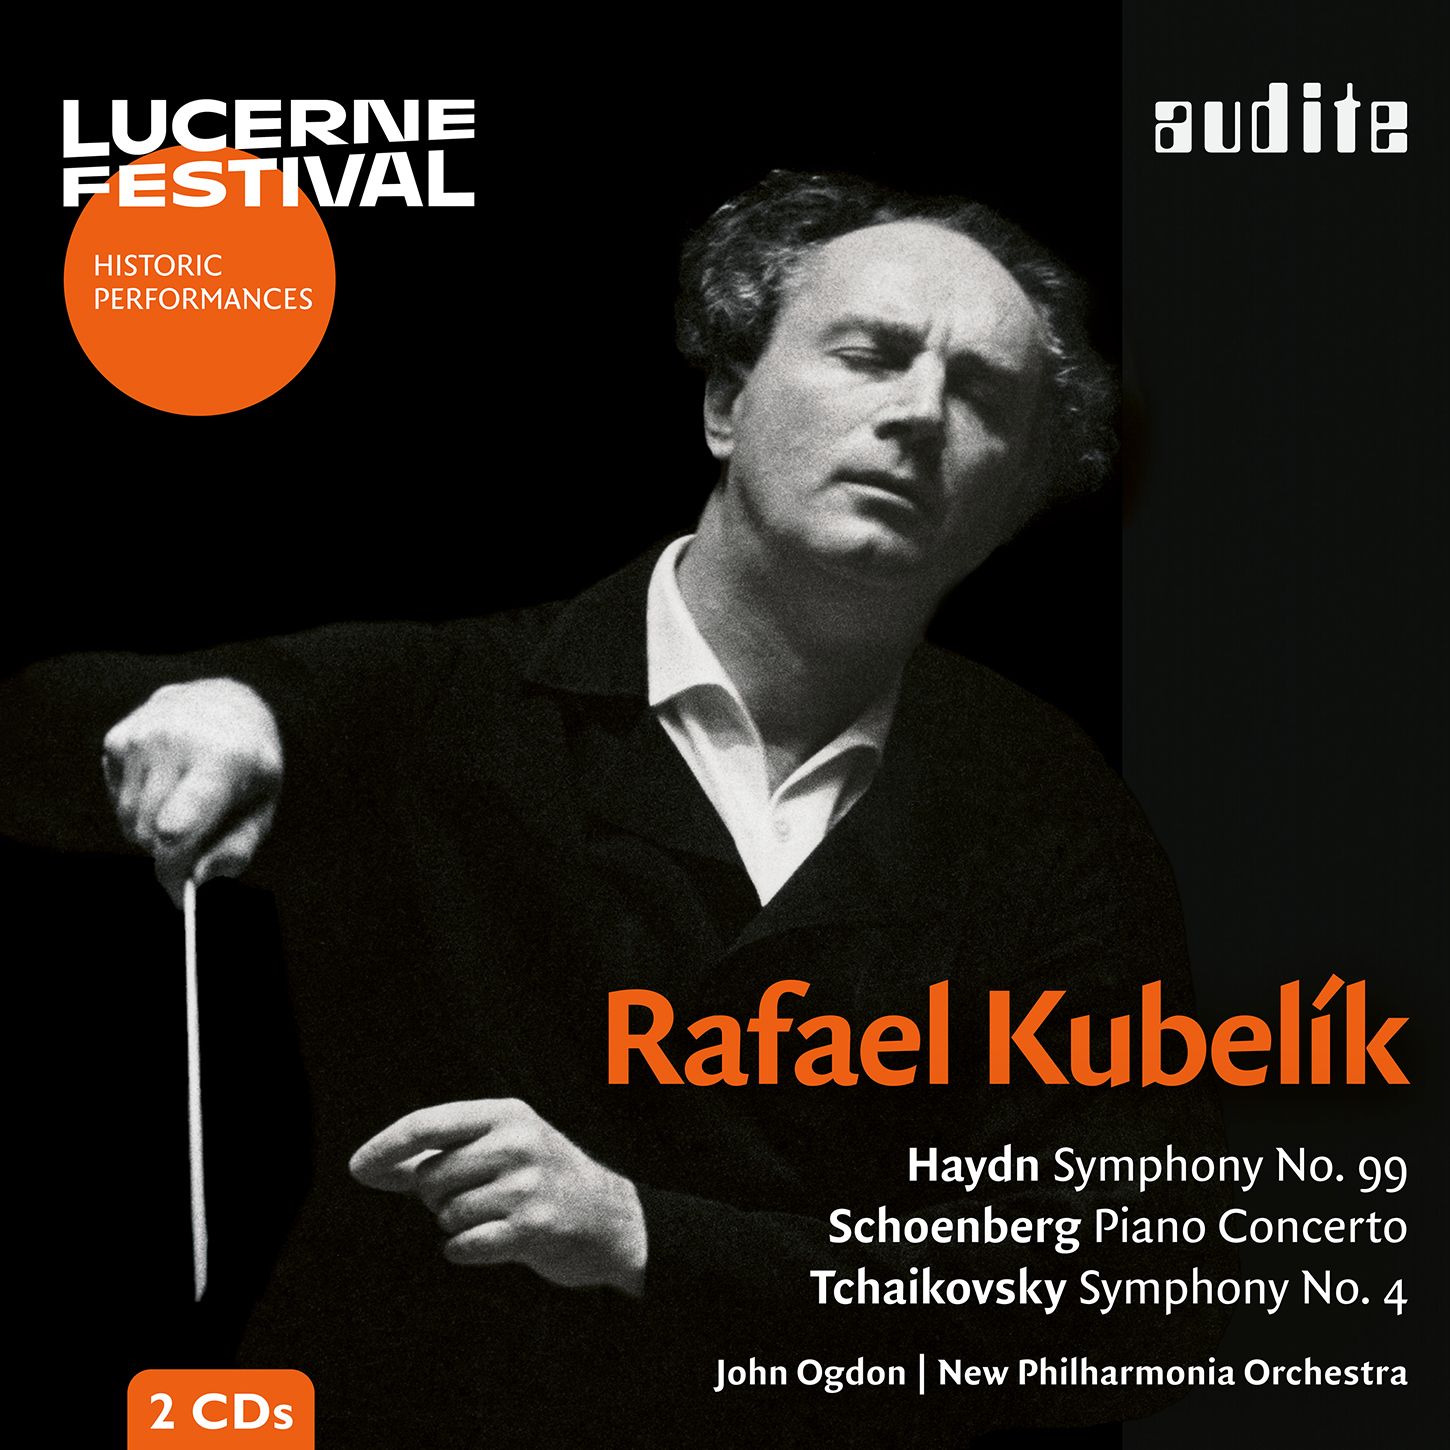 A Maestro Conducts: Rafael Kubelík and the New Philharmonia Orchestra